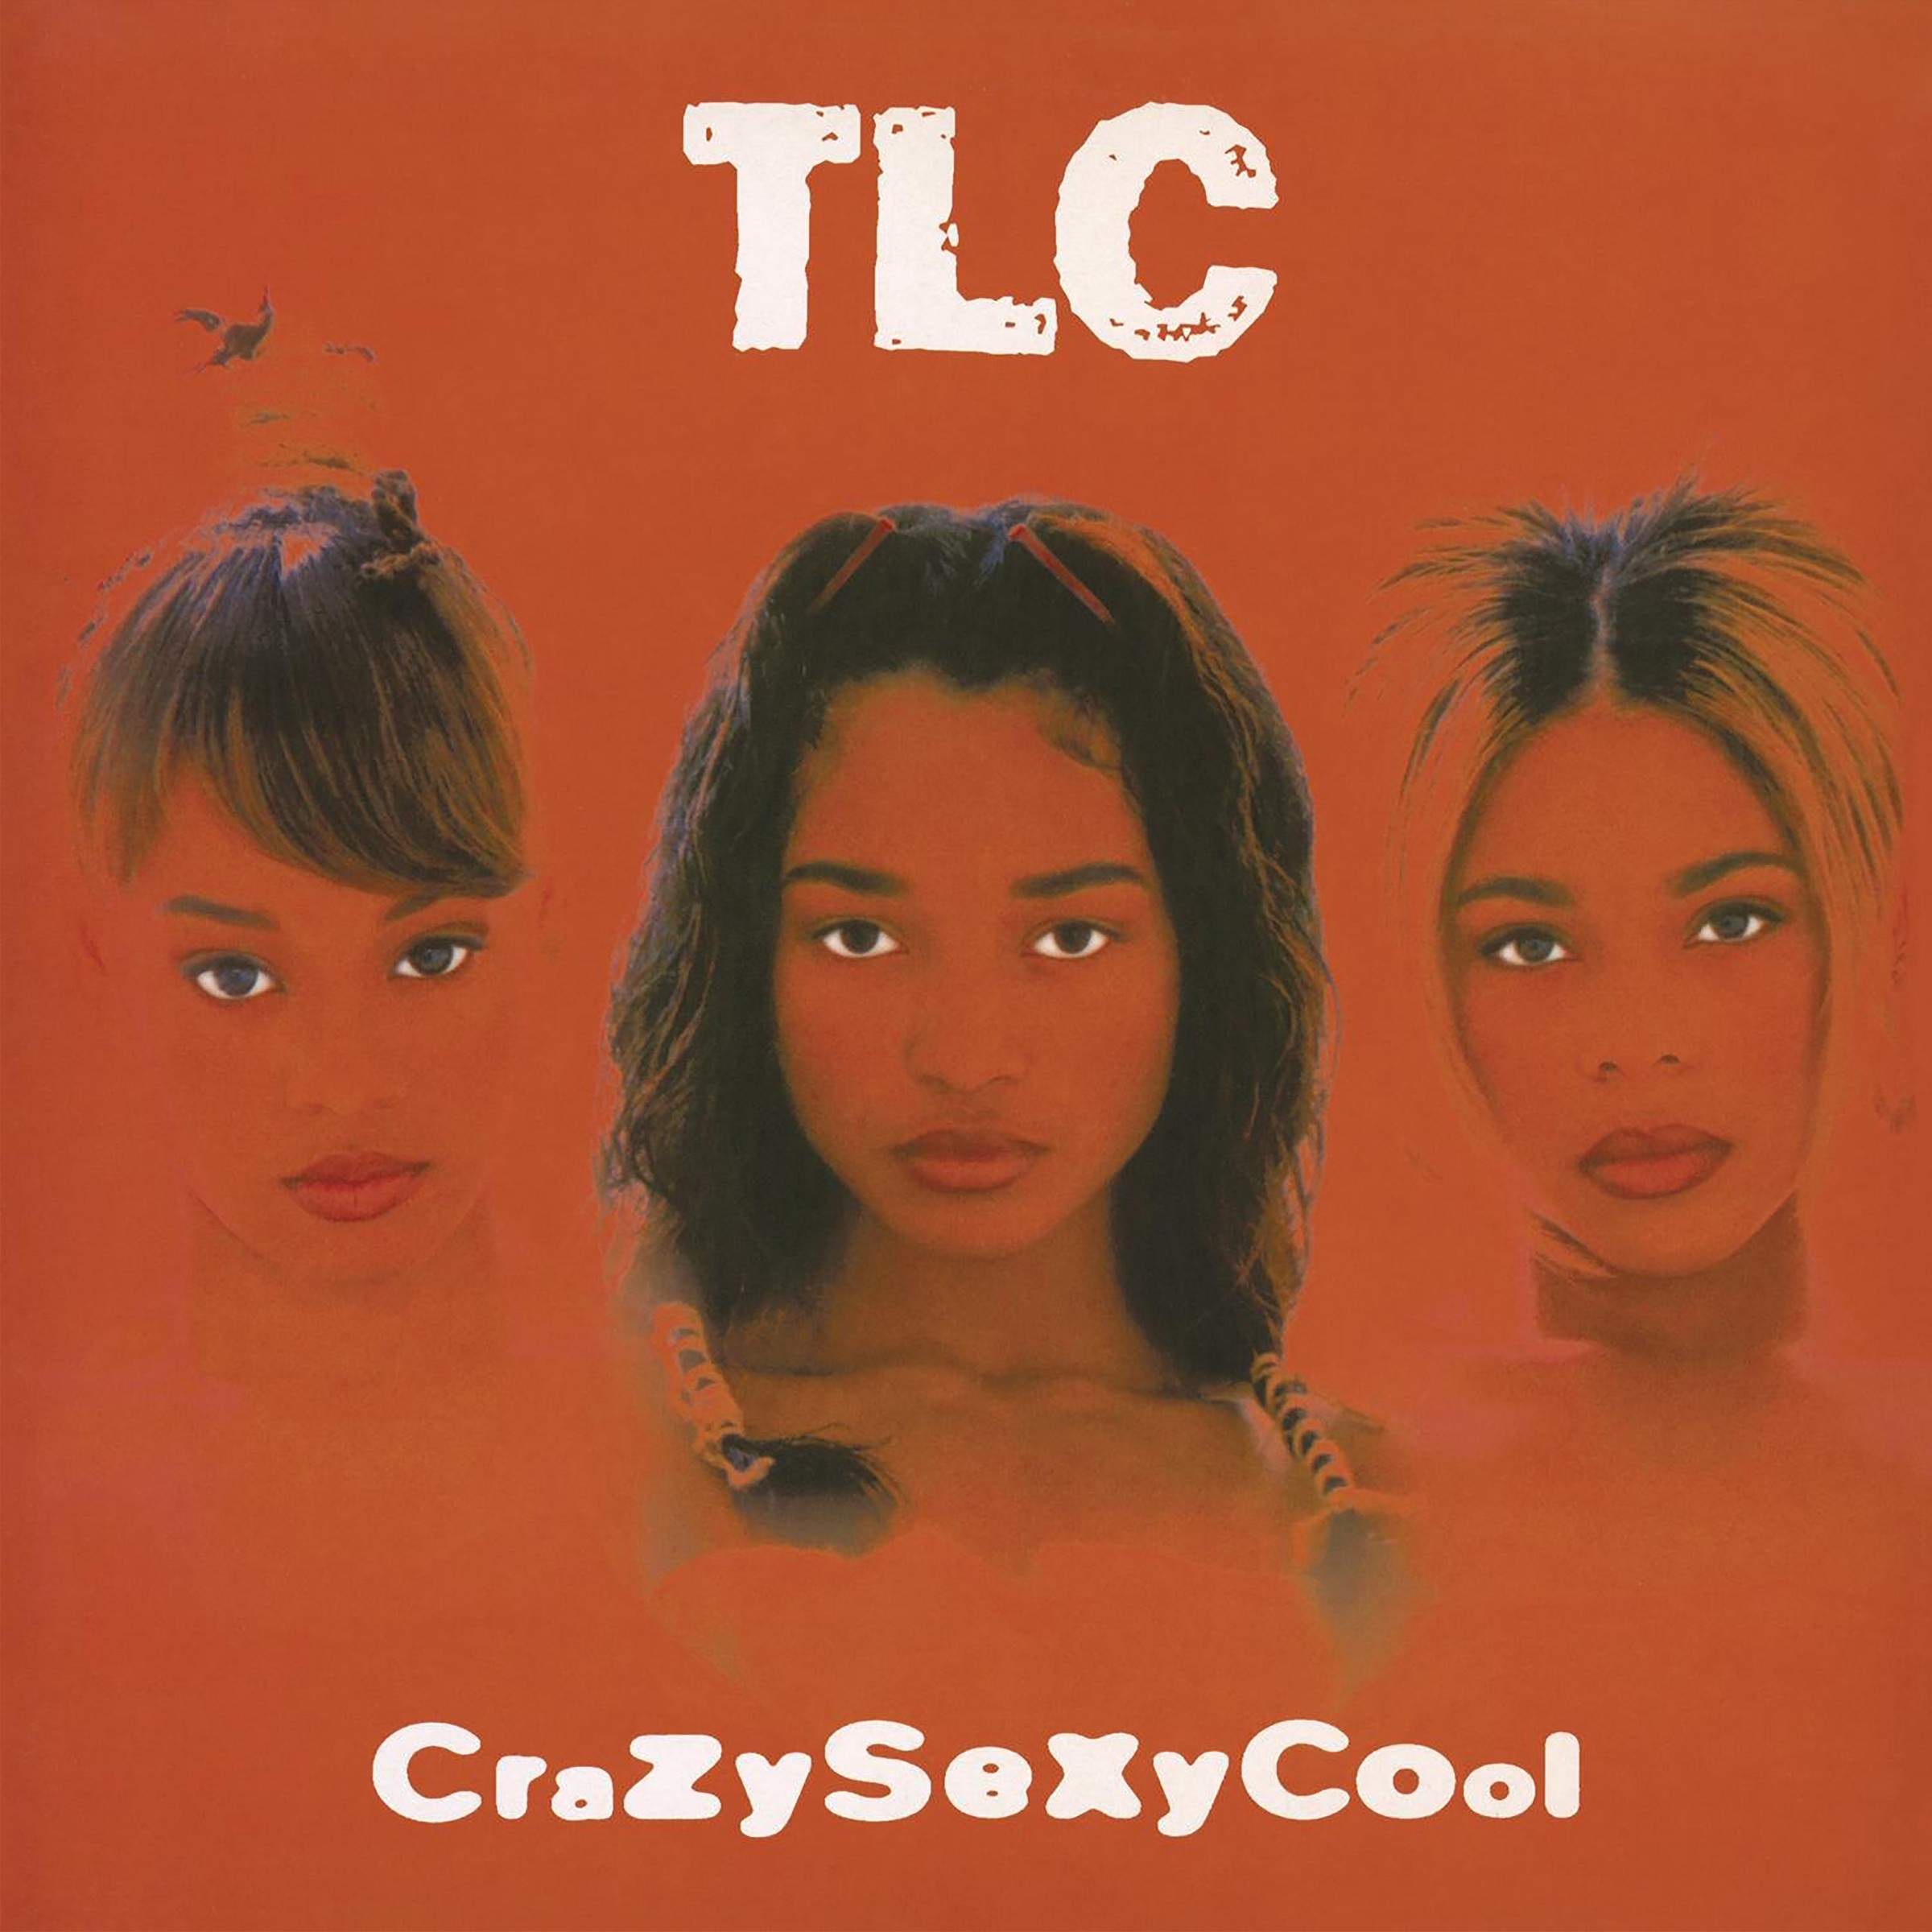 Tlc Crazy Sexy Cool Album Cover Poster Lost Posters